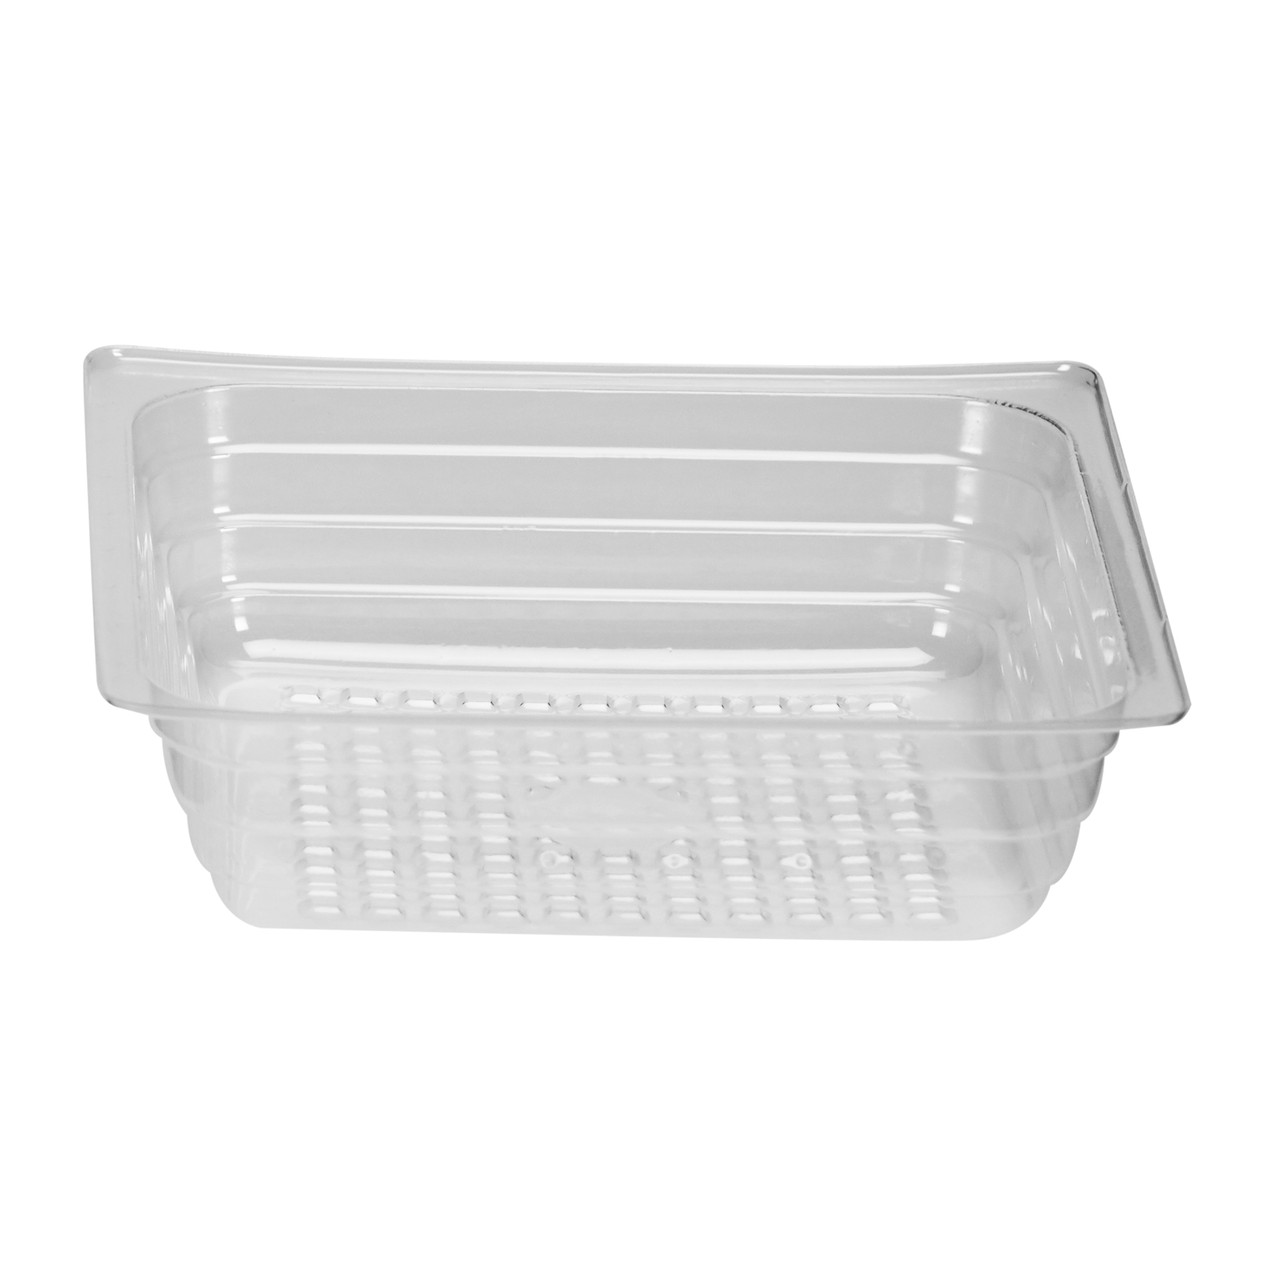 Polar Pak® Grab & Go Containers 4 oz Clear Tray (29421)